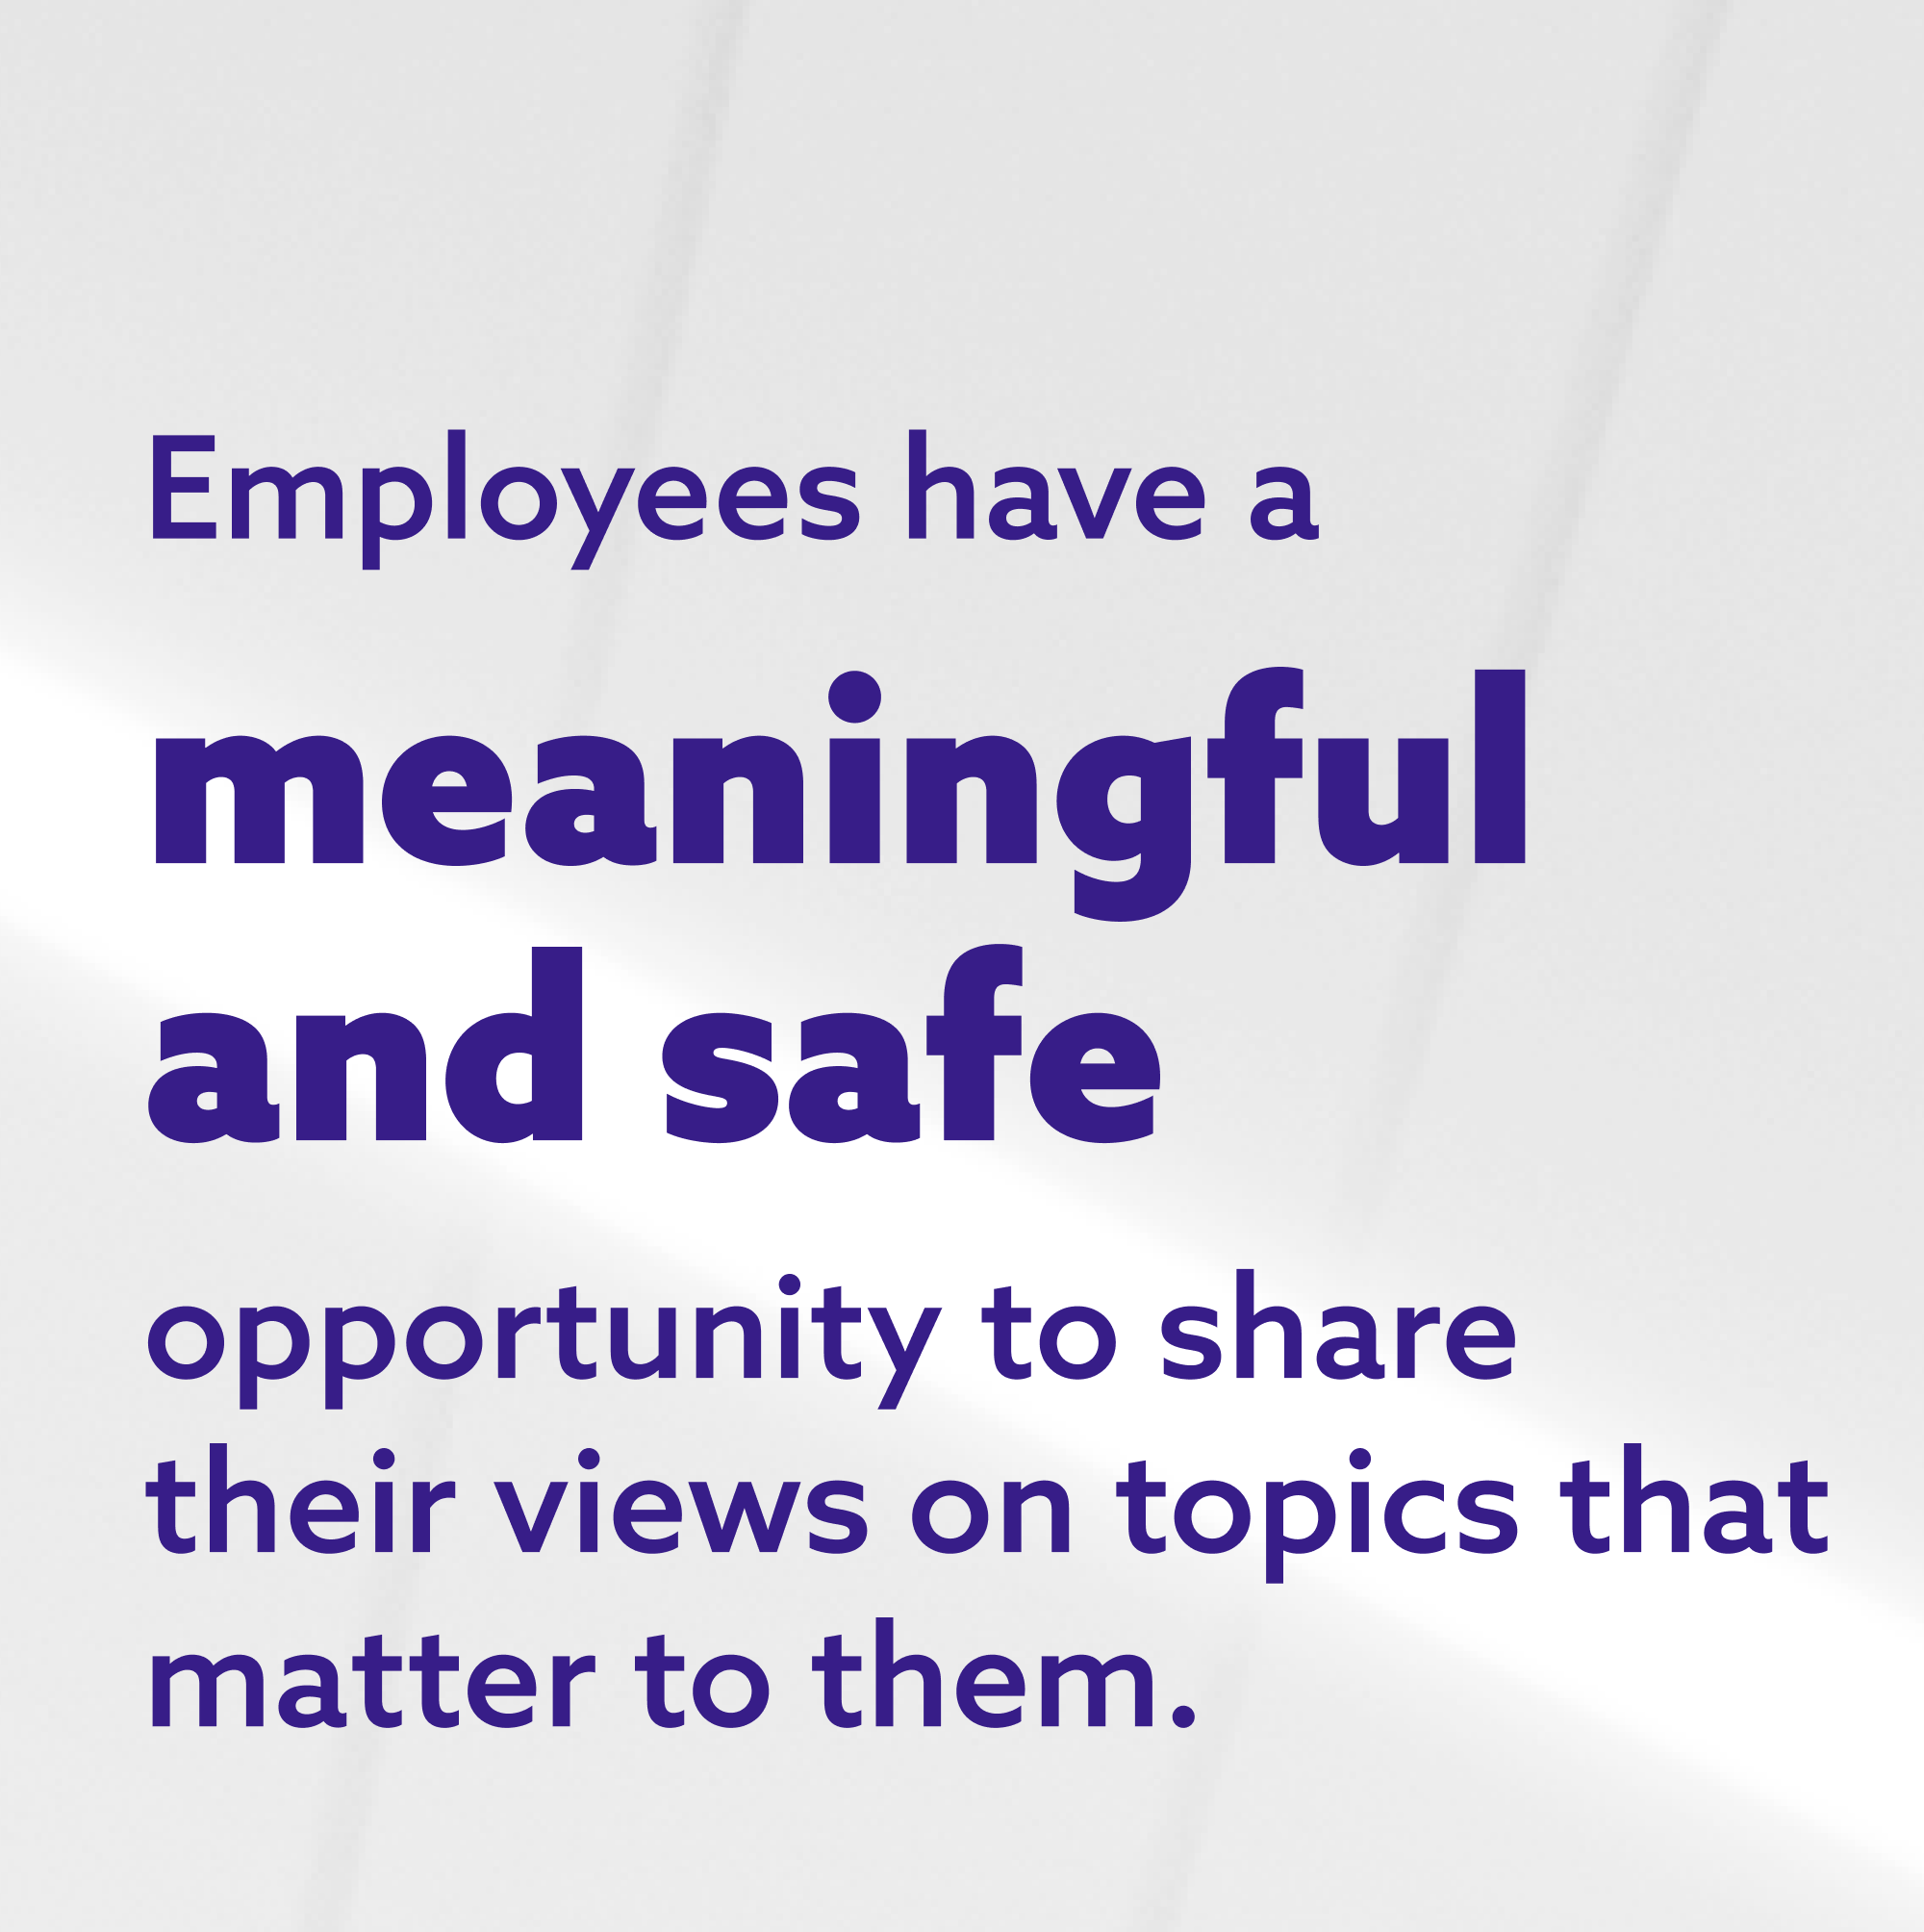 Employees have a meaningful and safe opportunity to share their views on topics that matter to them.